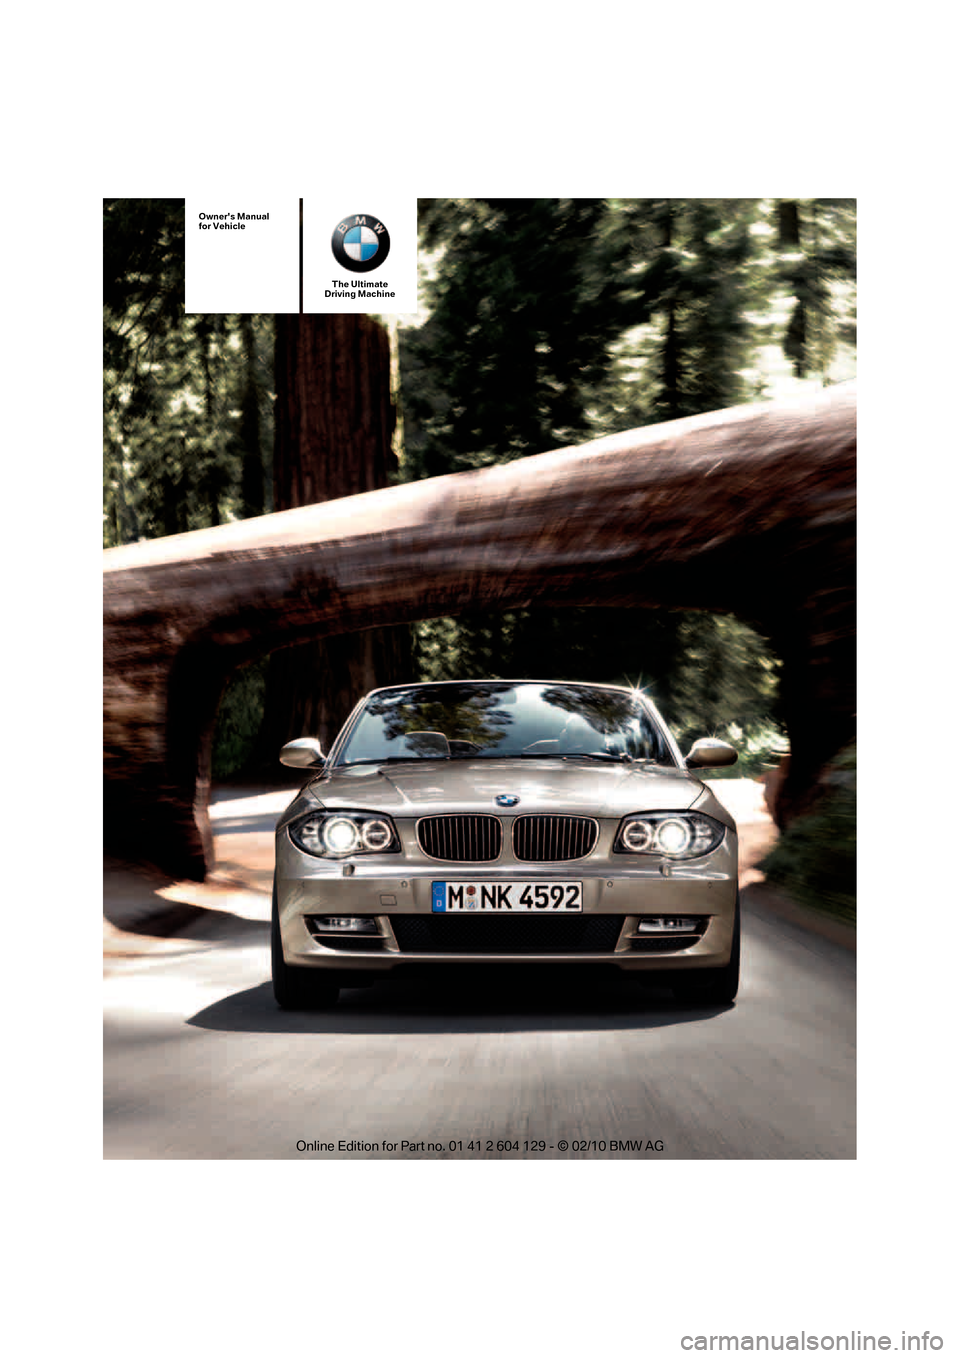 BMW 128I COUPE 2011 E82 Owners Manual The Ultimate
Driving Machine
Owners Manual
for Vehicle 